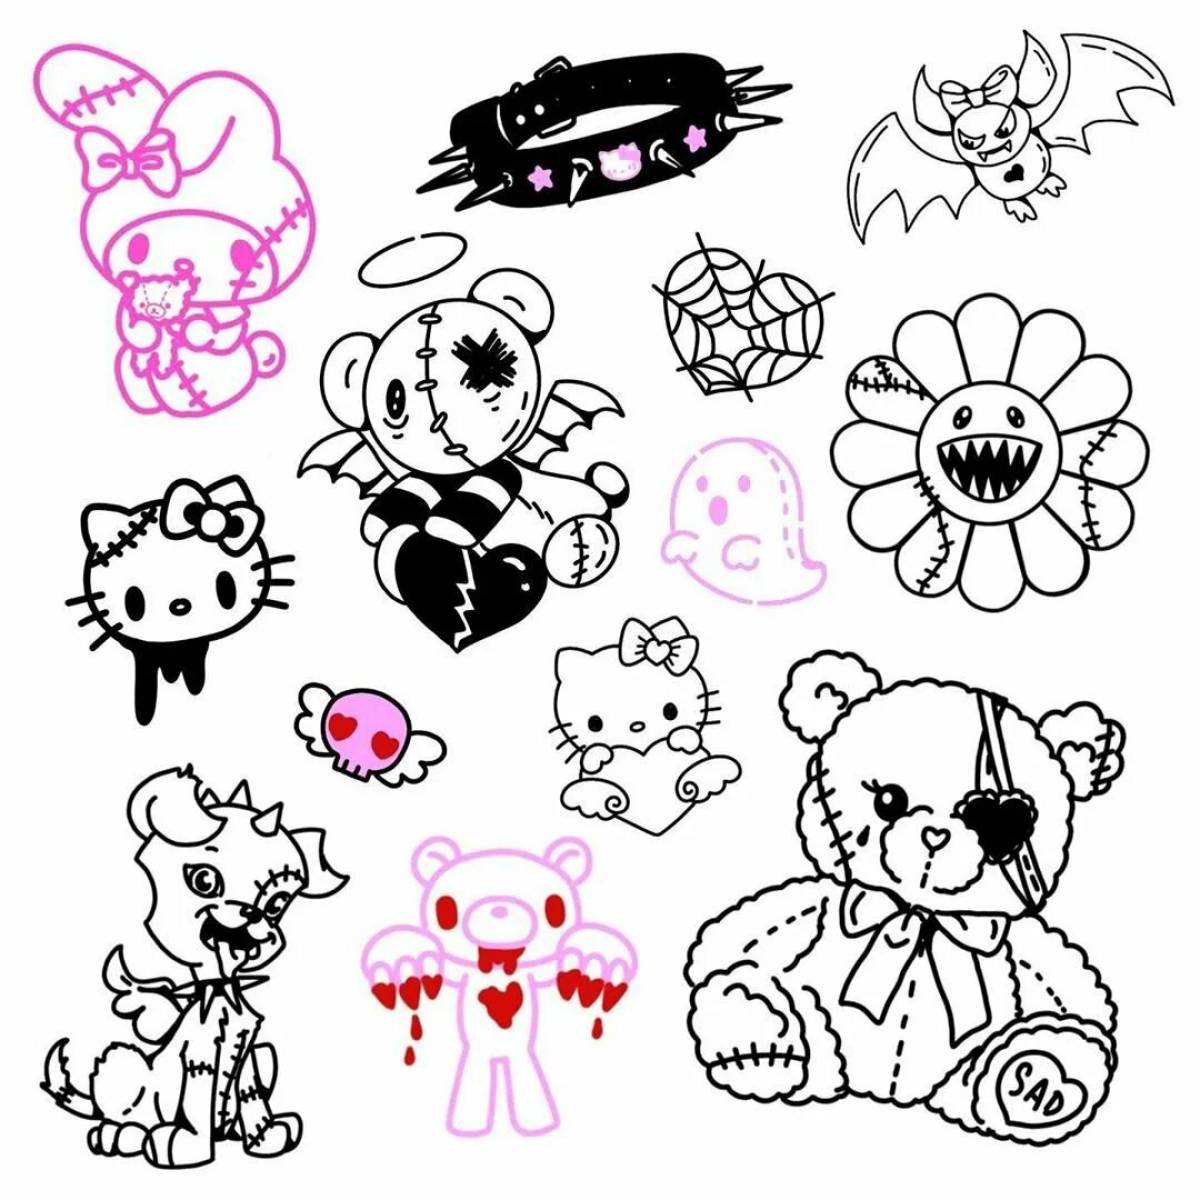 Mini drawings for making stickers #7